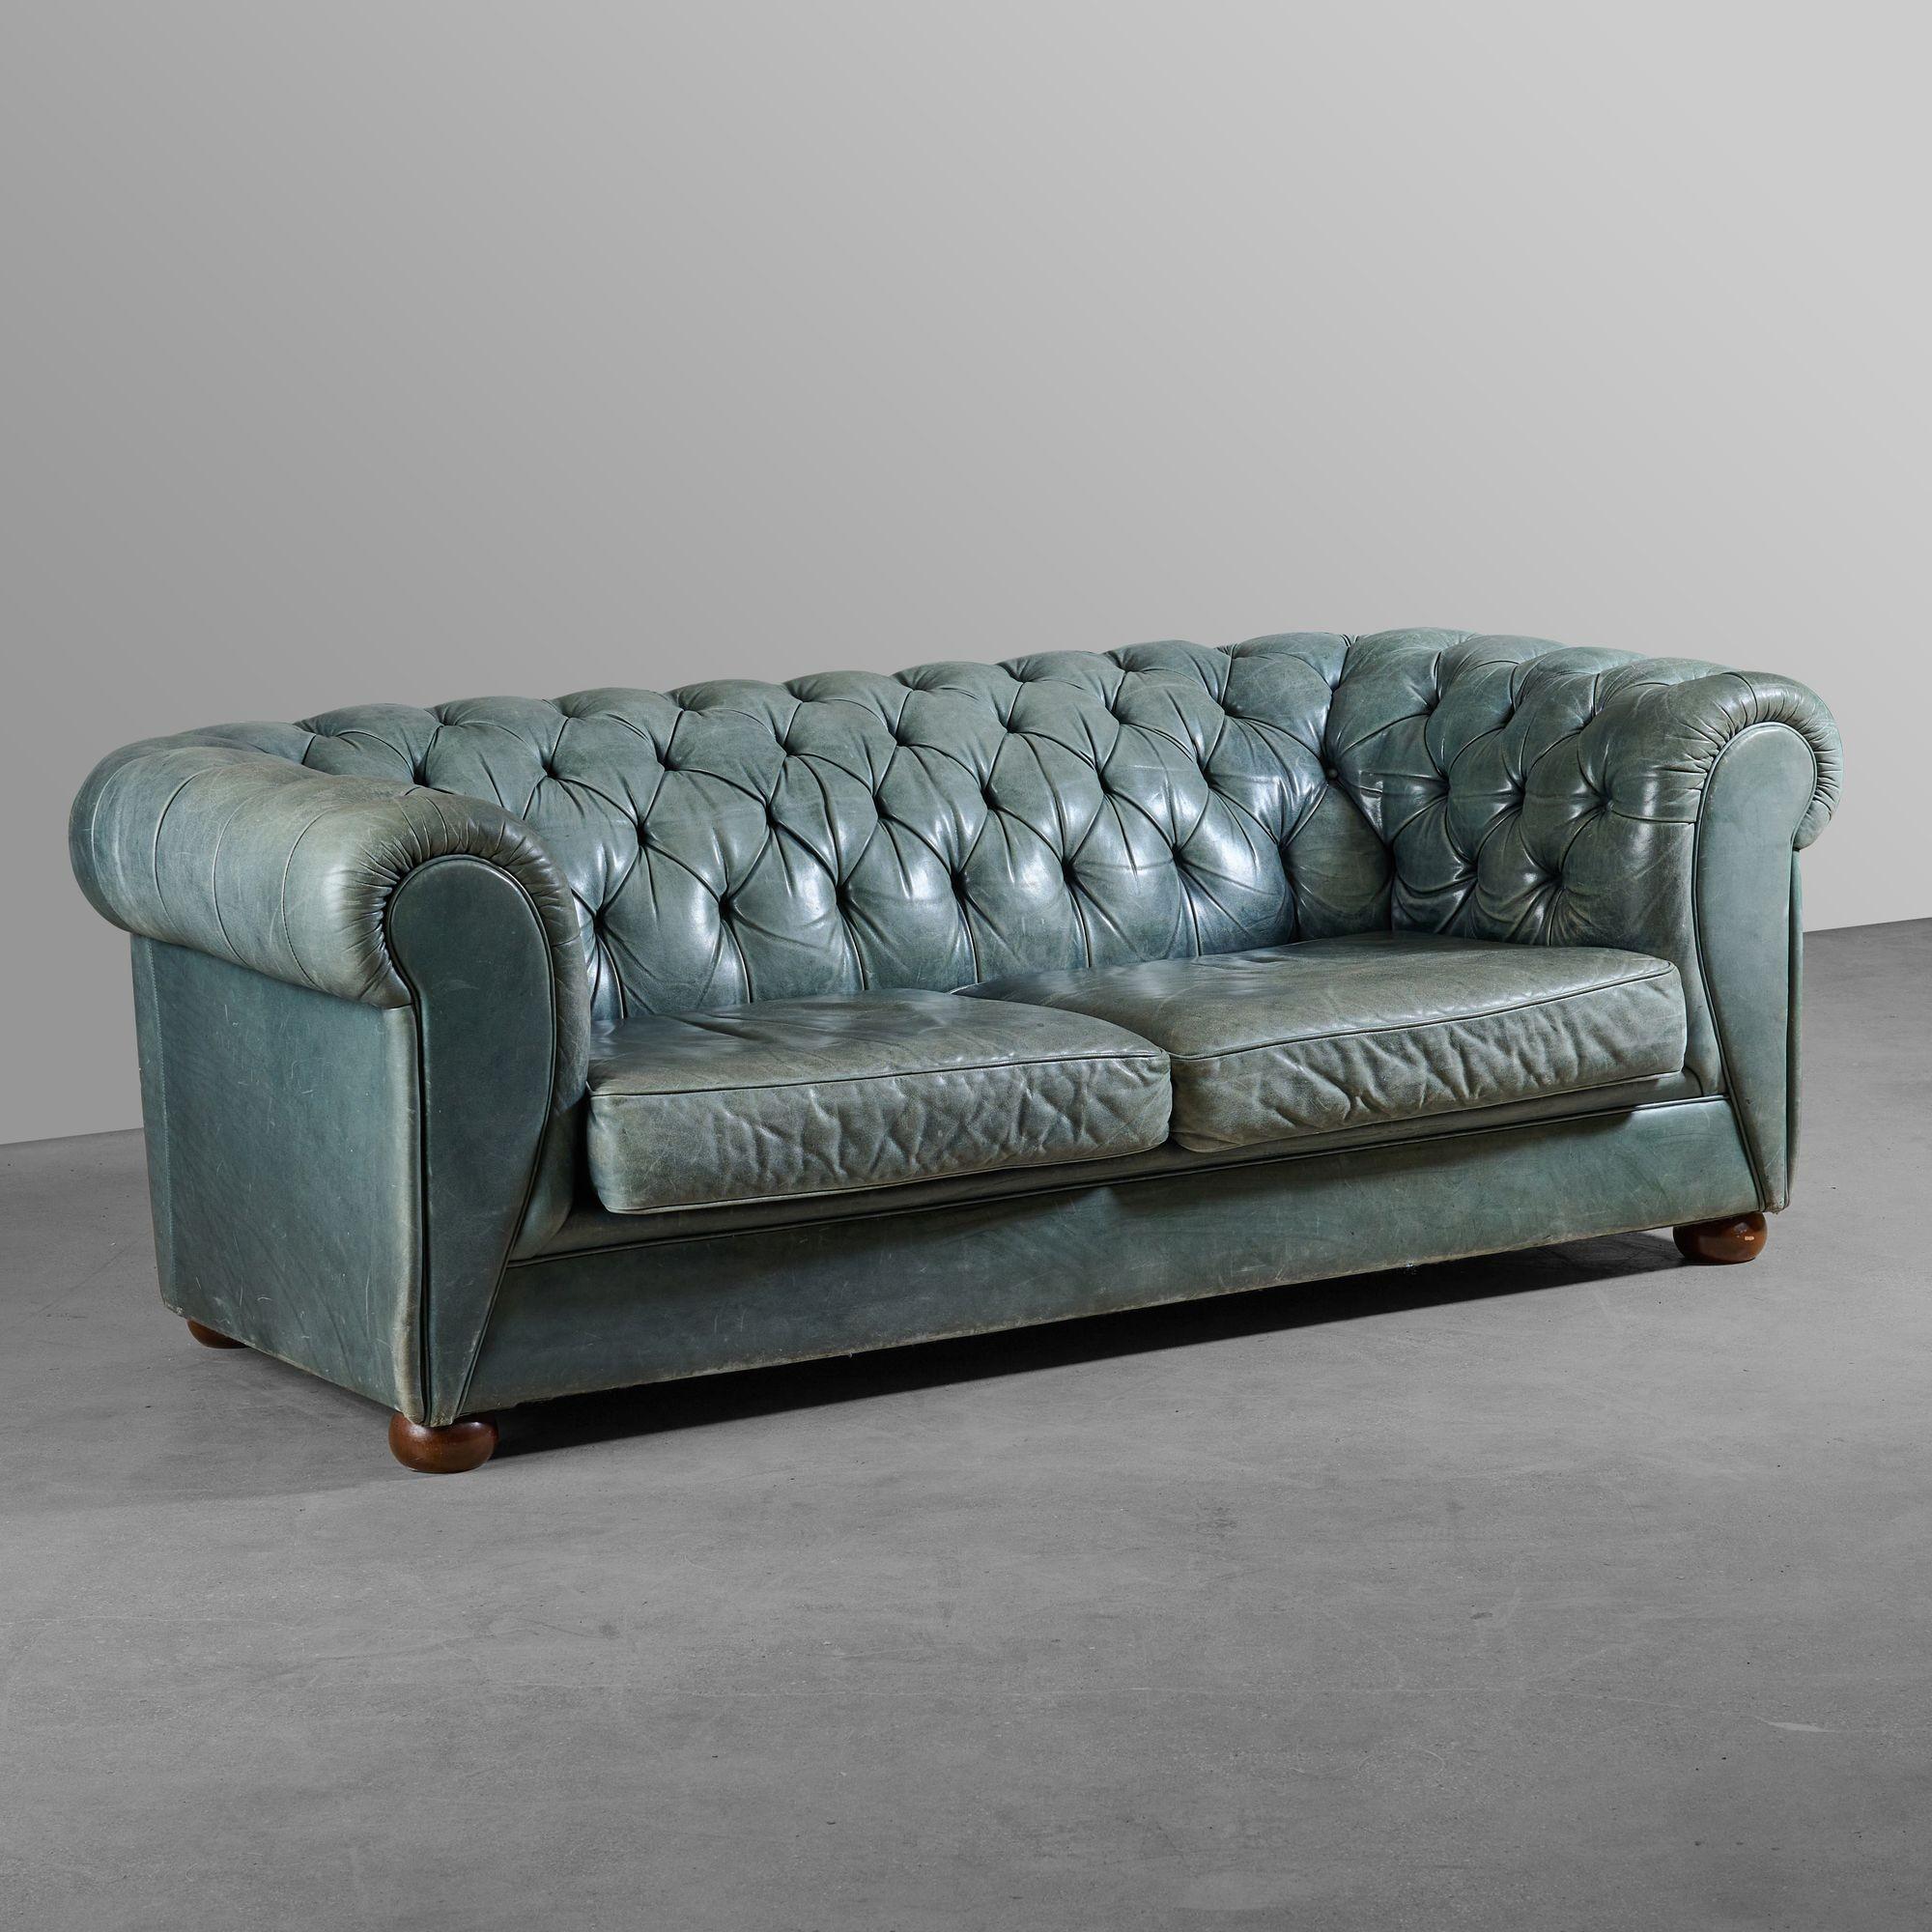 Green leather chesterfield sofa.